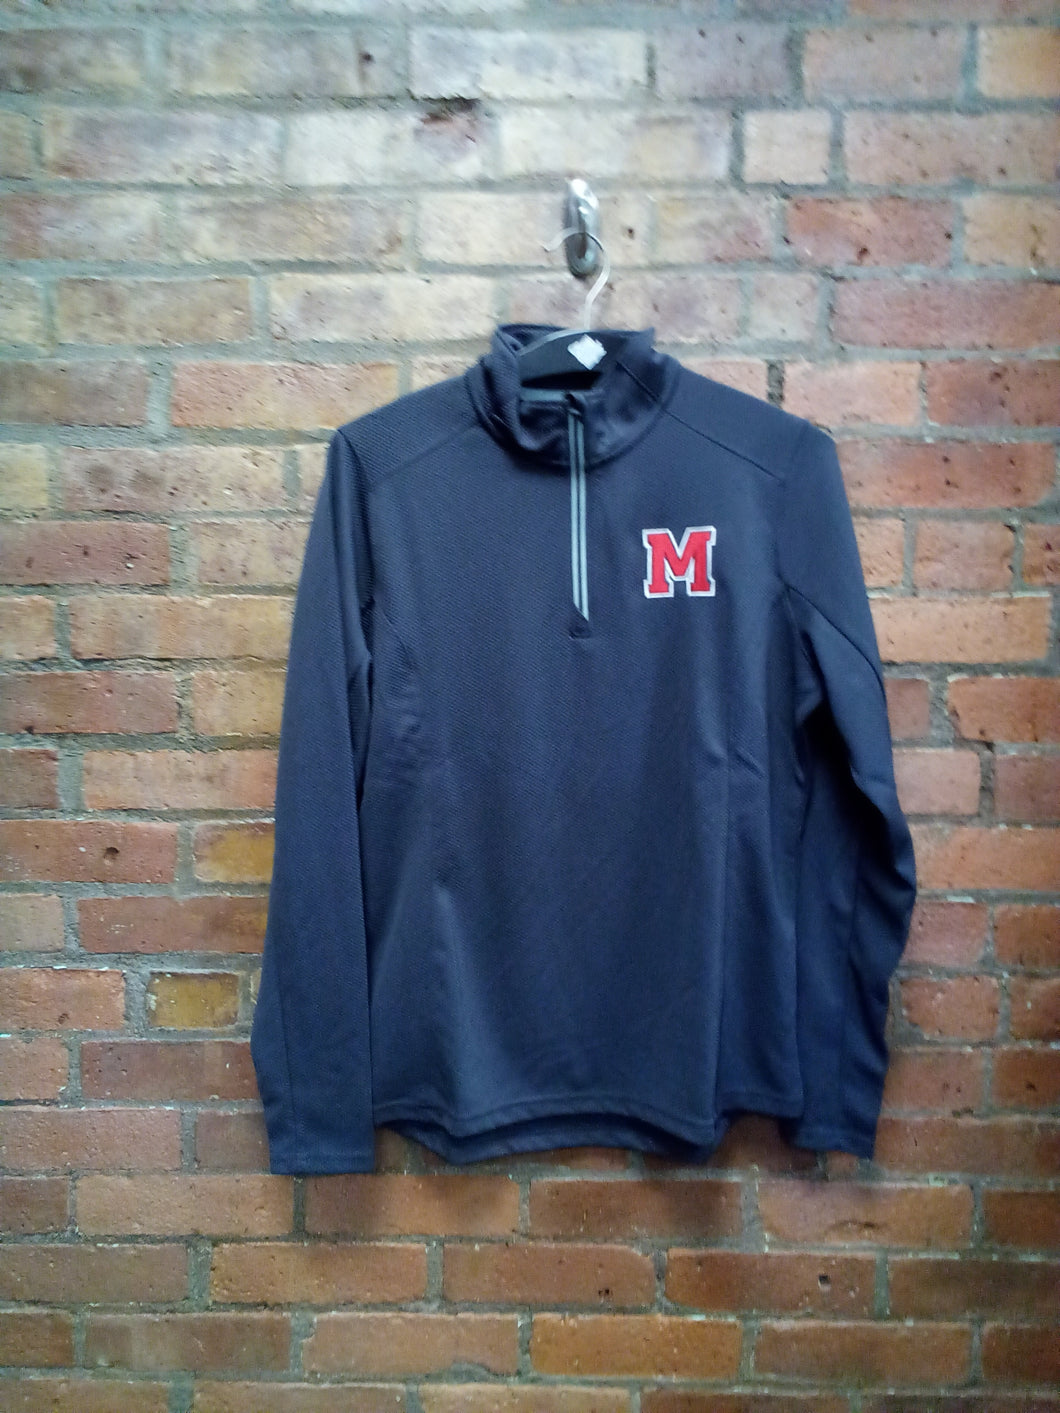 -CLEARANCE- Mechanicville Ladies textured 1/4 zip pullover - Size - M